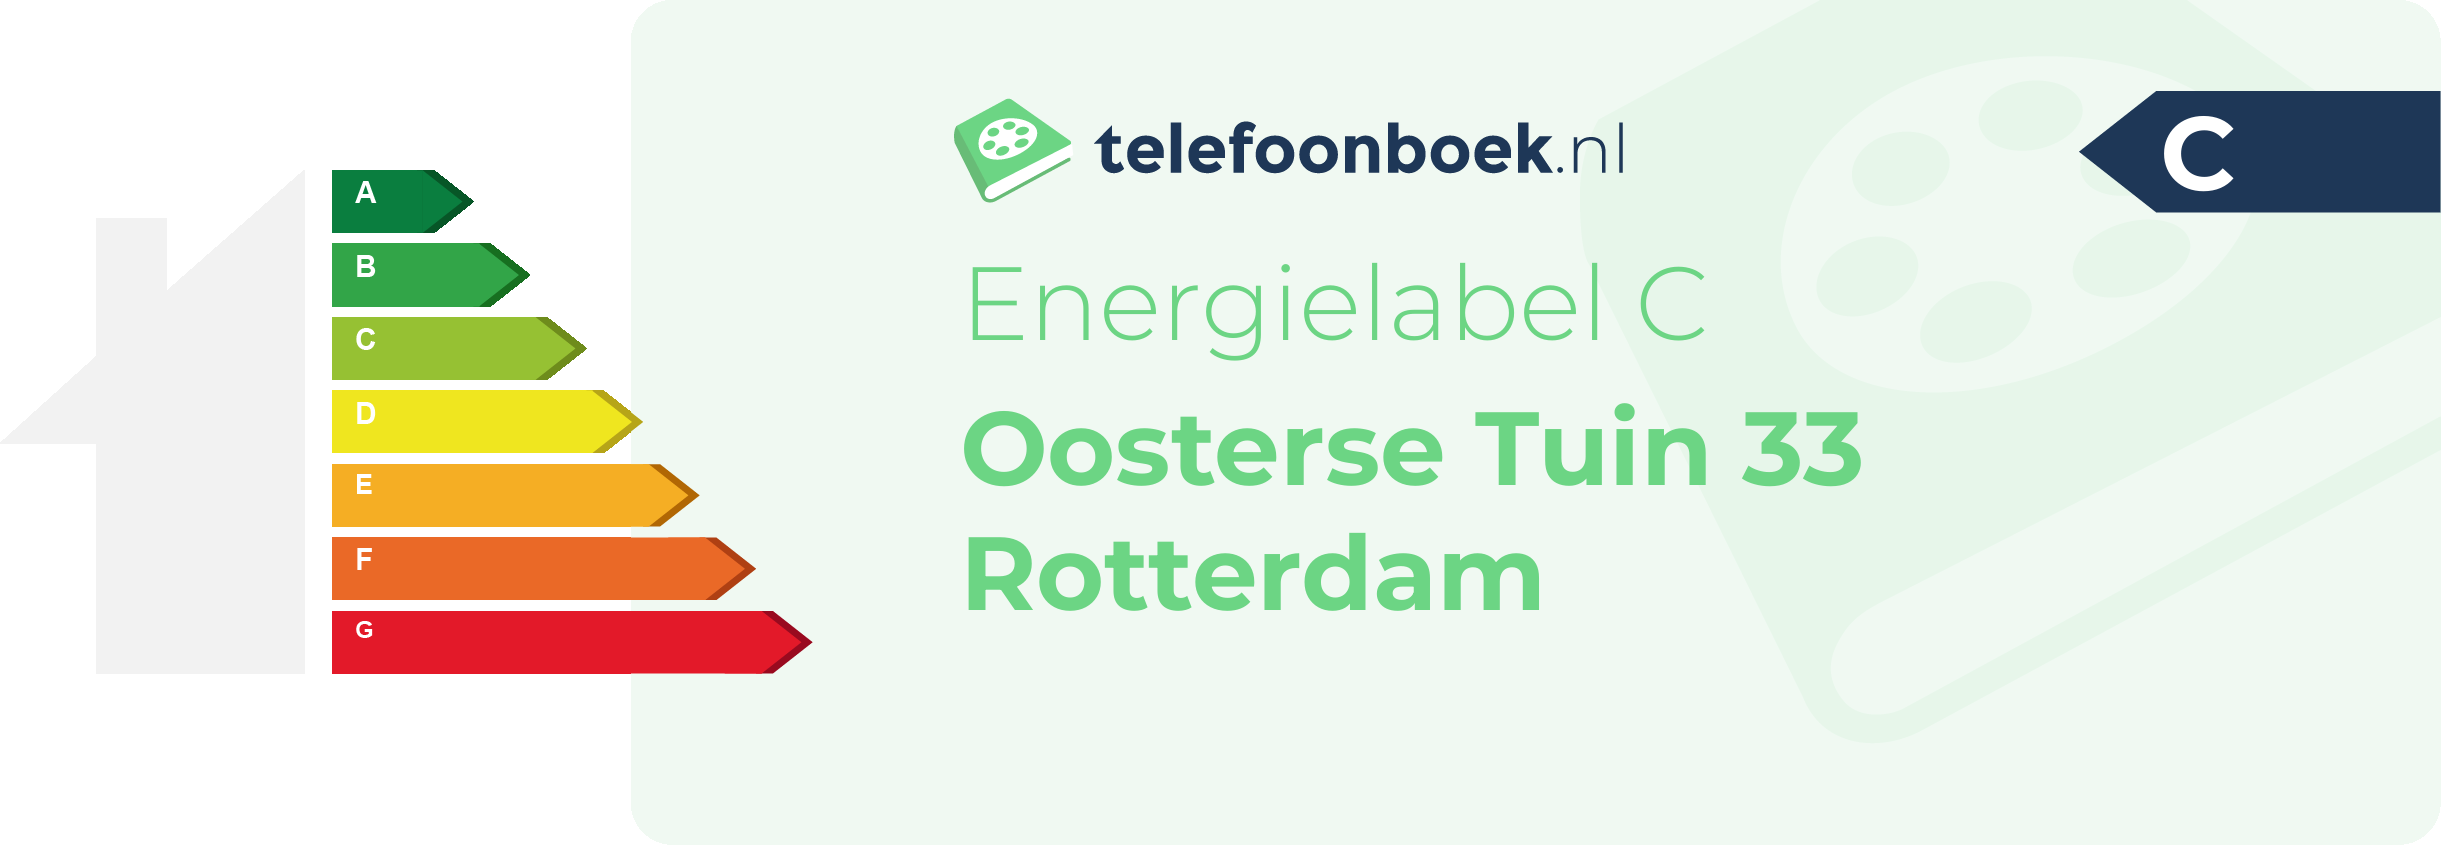 Energielabel Oosterse Tuin 33 Rotterdam